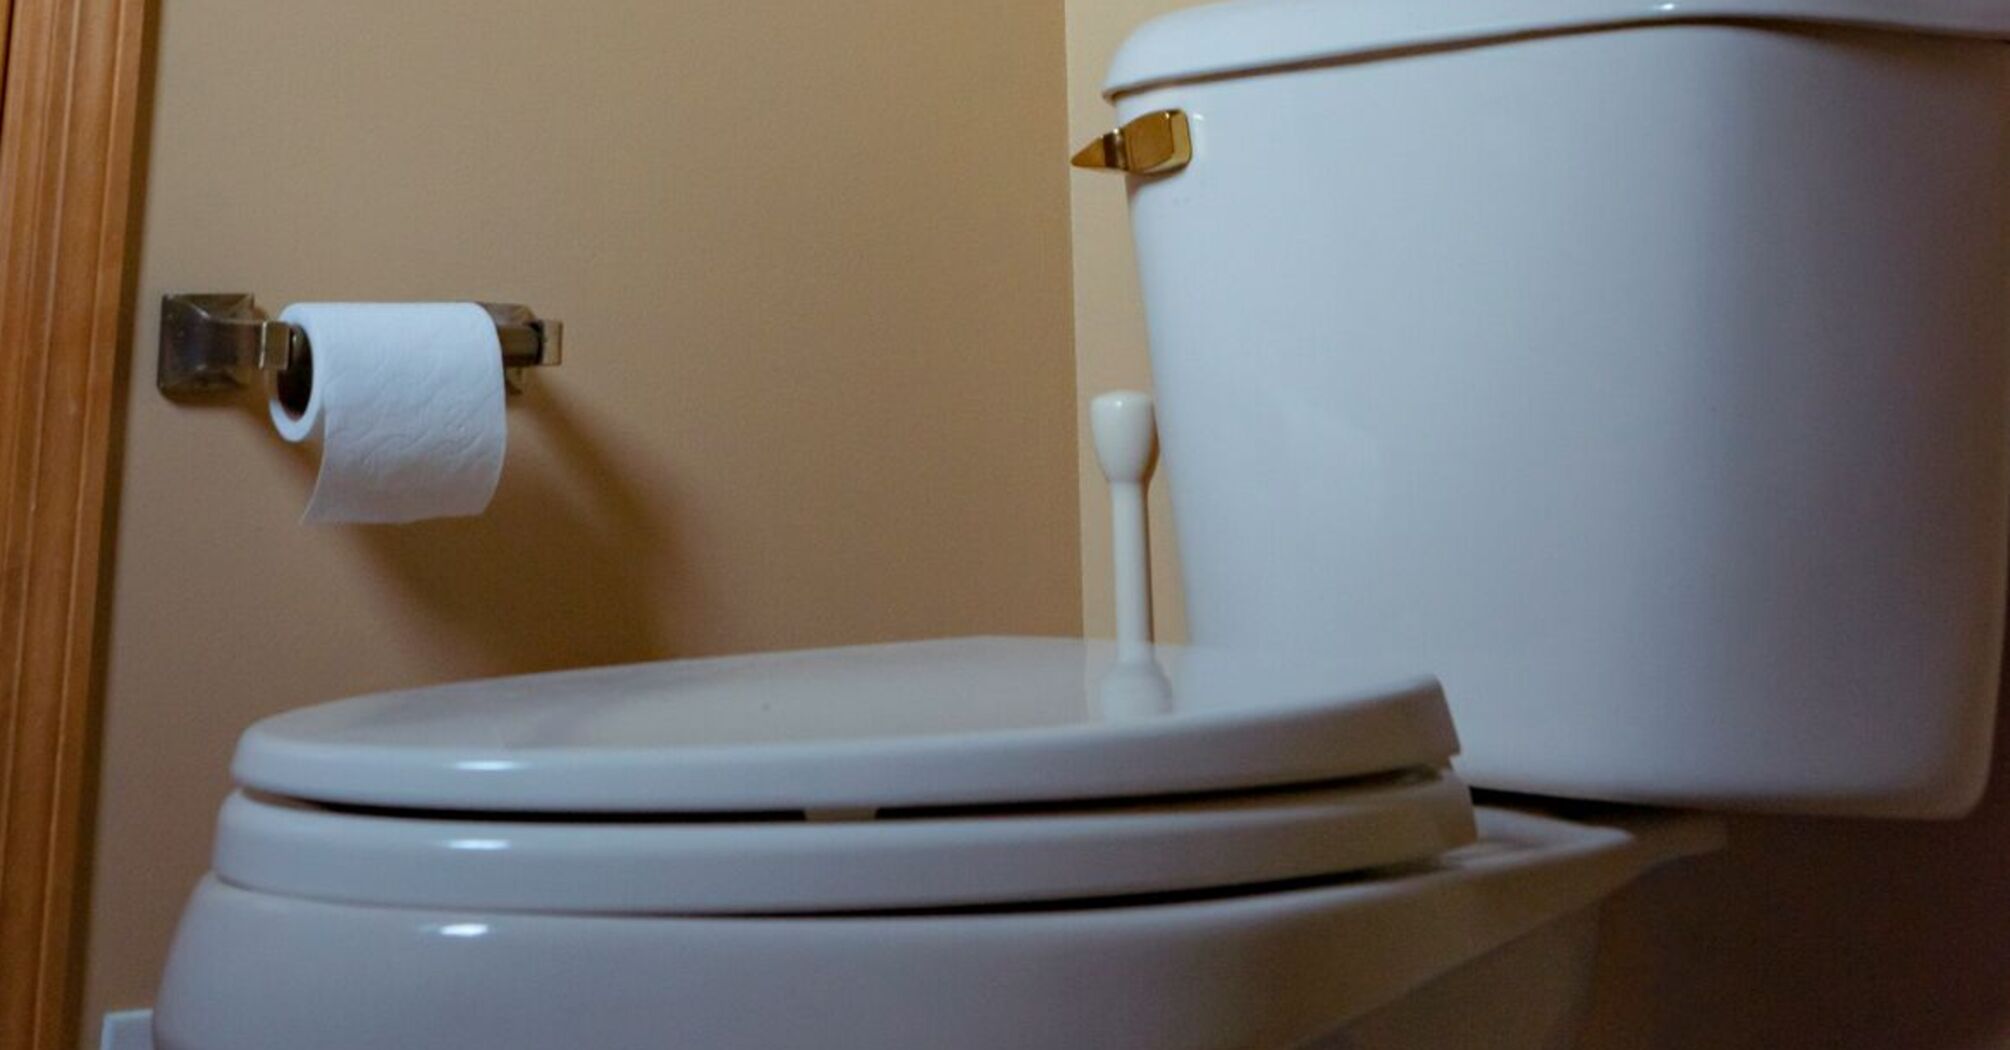 Stewardess tells what she never does in an airplane toilet